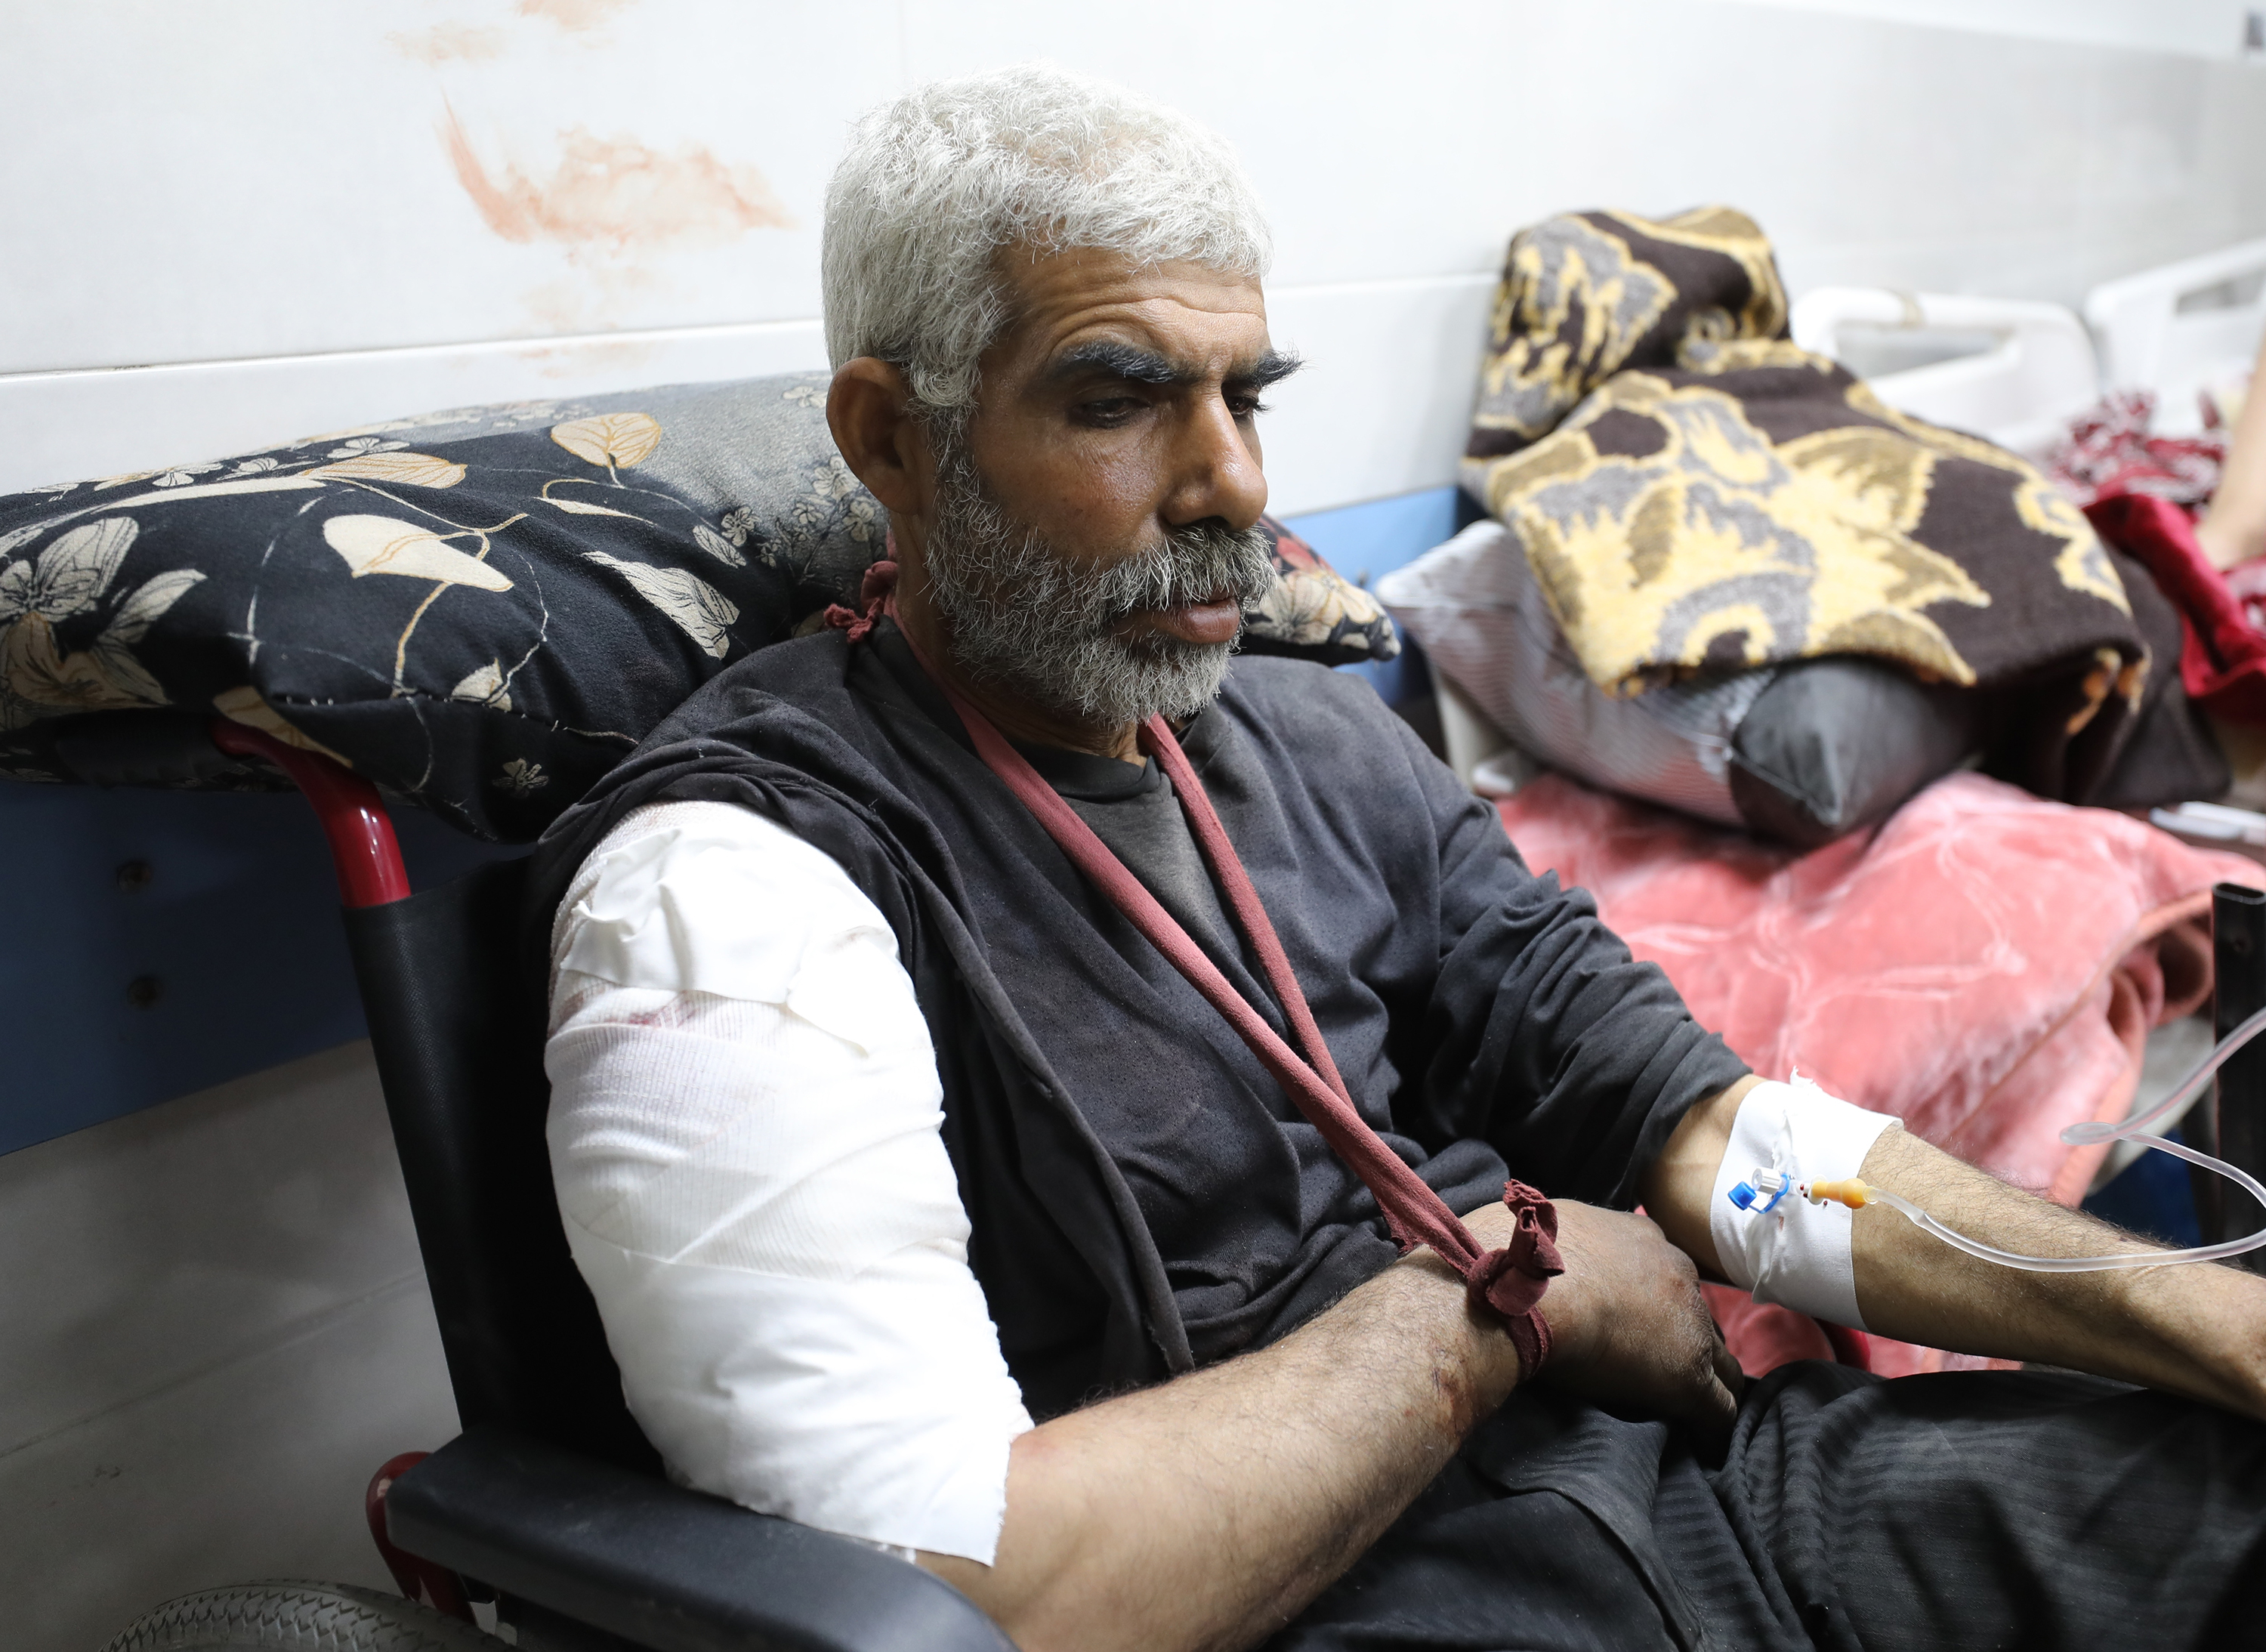 An injured Palestinian receives medical treatment in Al-Shifa Hospital after Israeli forces open fire on Palestinians waiting for humanitarian aid trucks at Al-Rashid Street in Gaza City, Gaza on February 29.